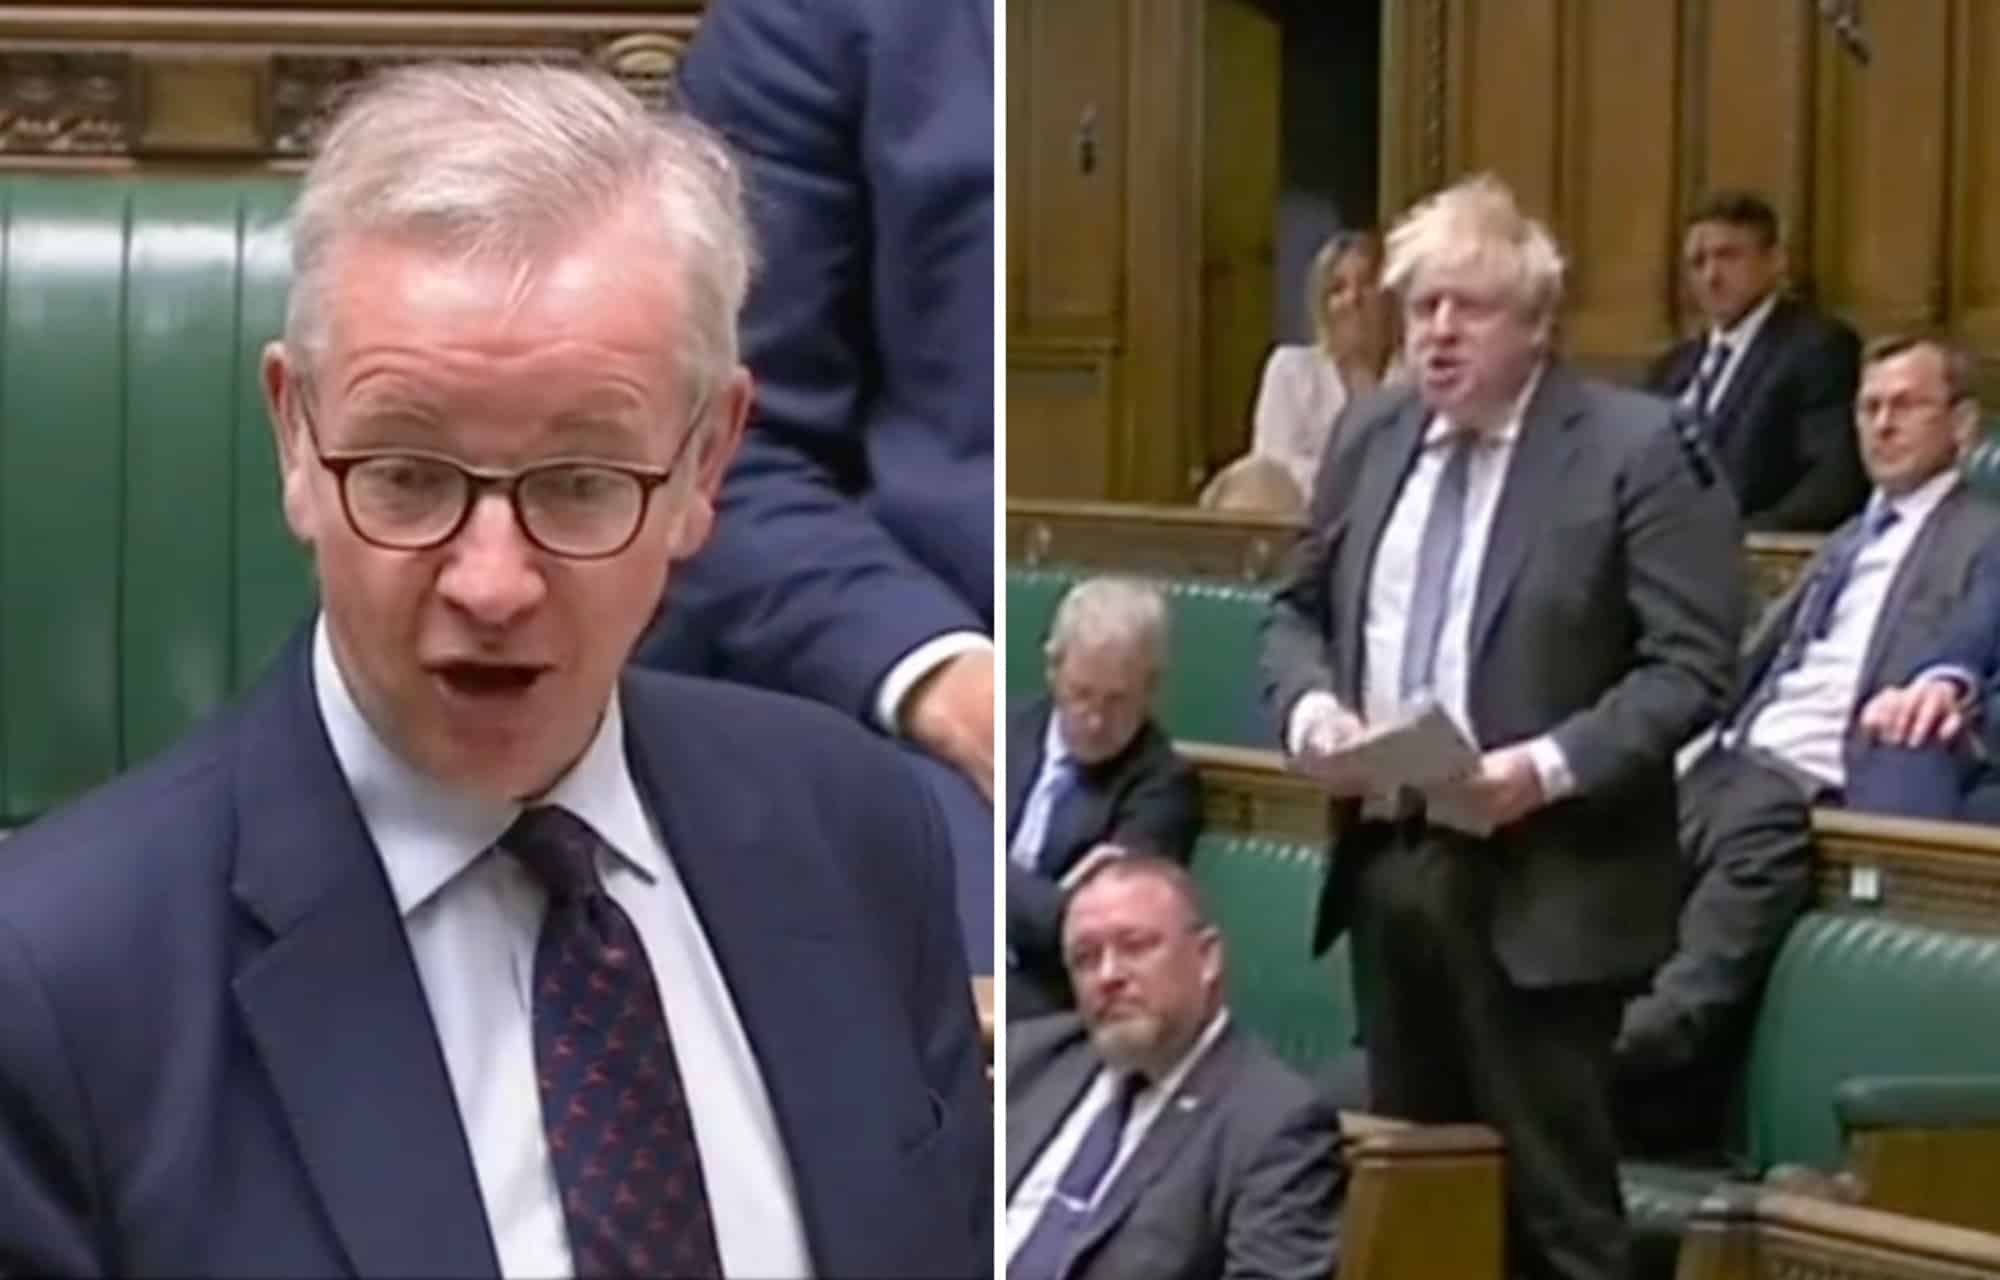 Watch: Commons bursts into laughter after Gove thanks Boris for his ‘leadership on levelling up’